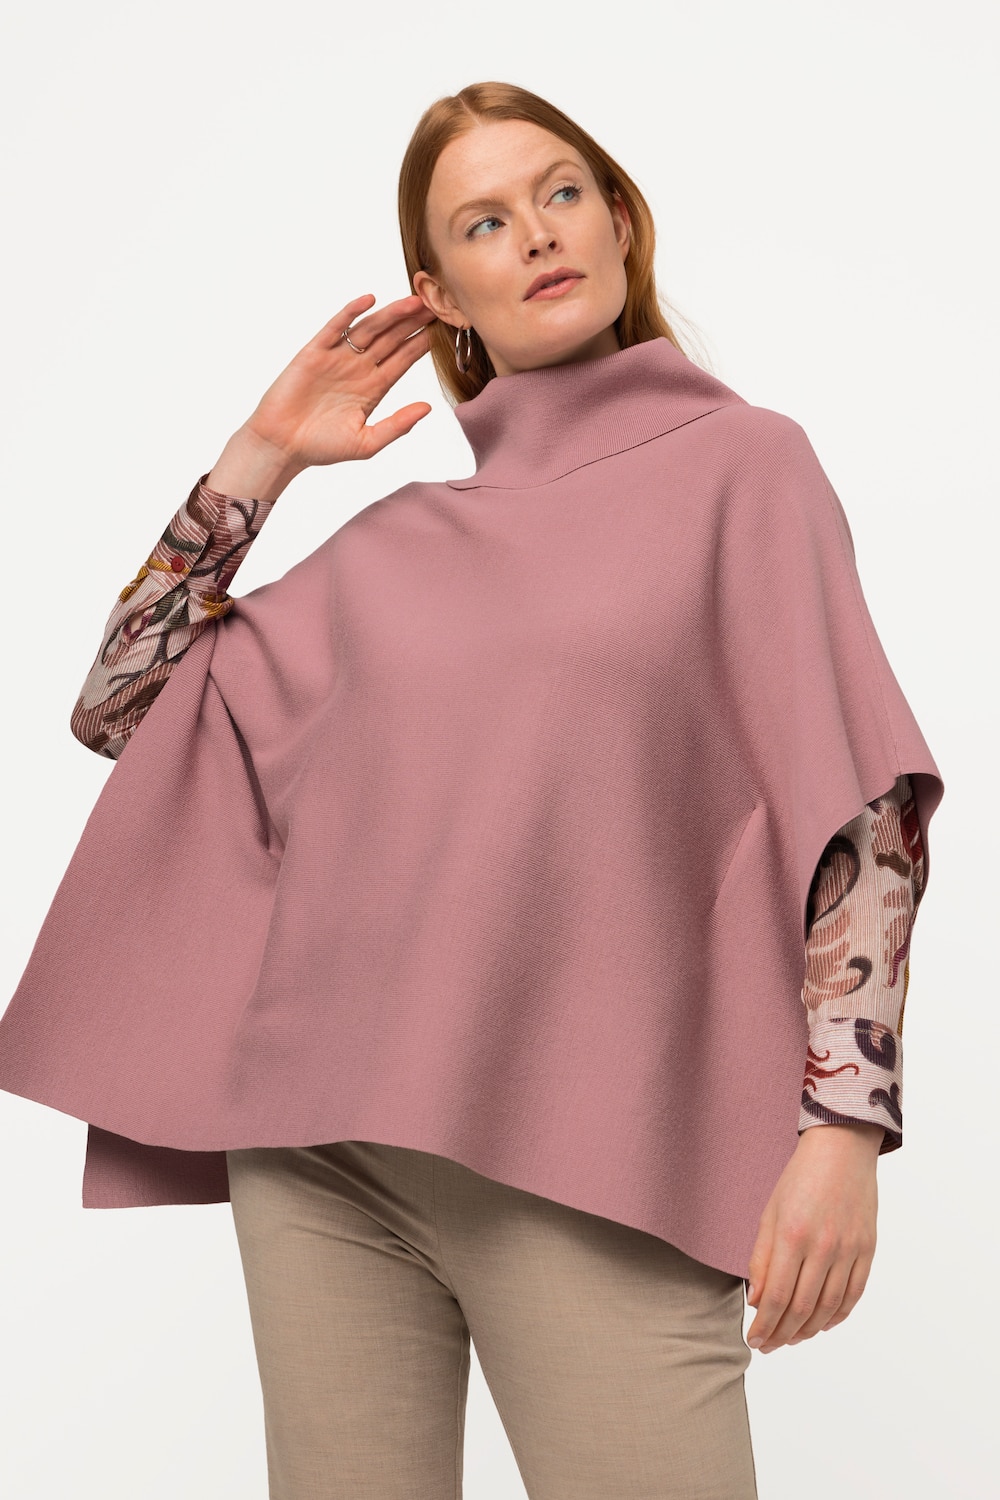 grandes tailles pull oversize style poncho à col montant et sans manches, femmes, rose, taille: 52-58, viscose/polyester, ulla popken